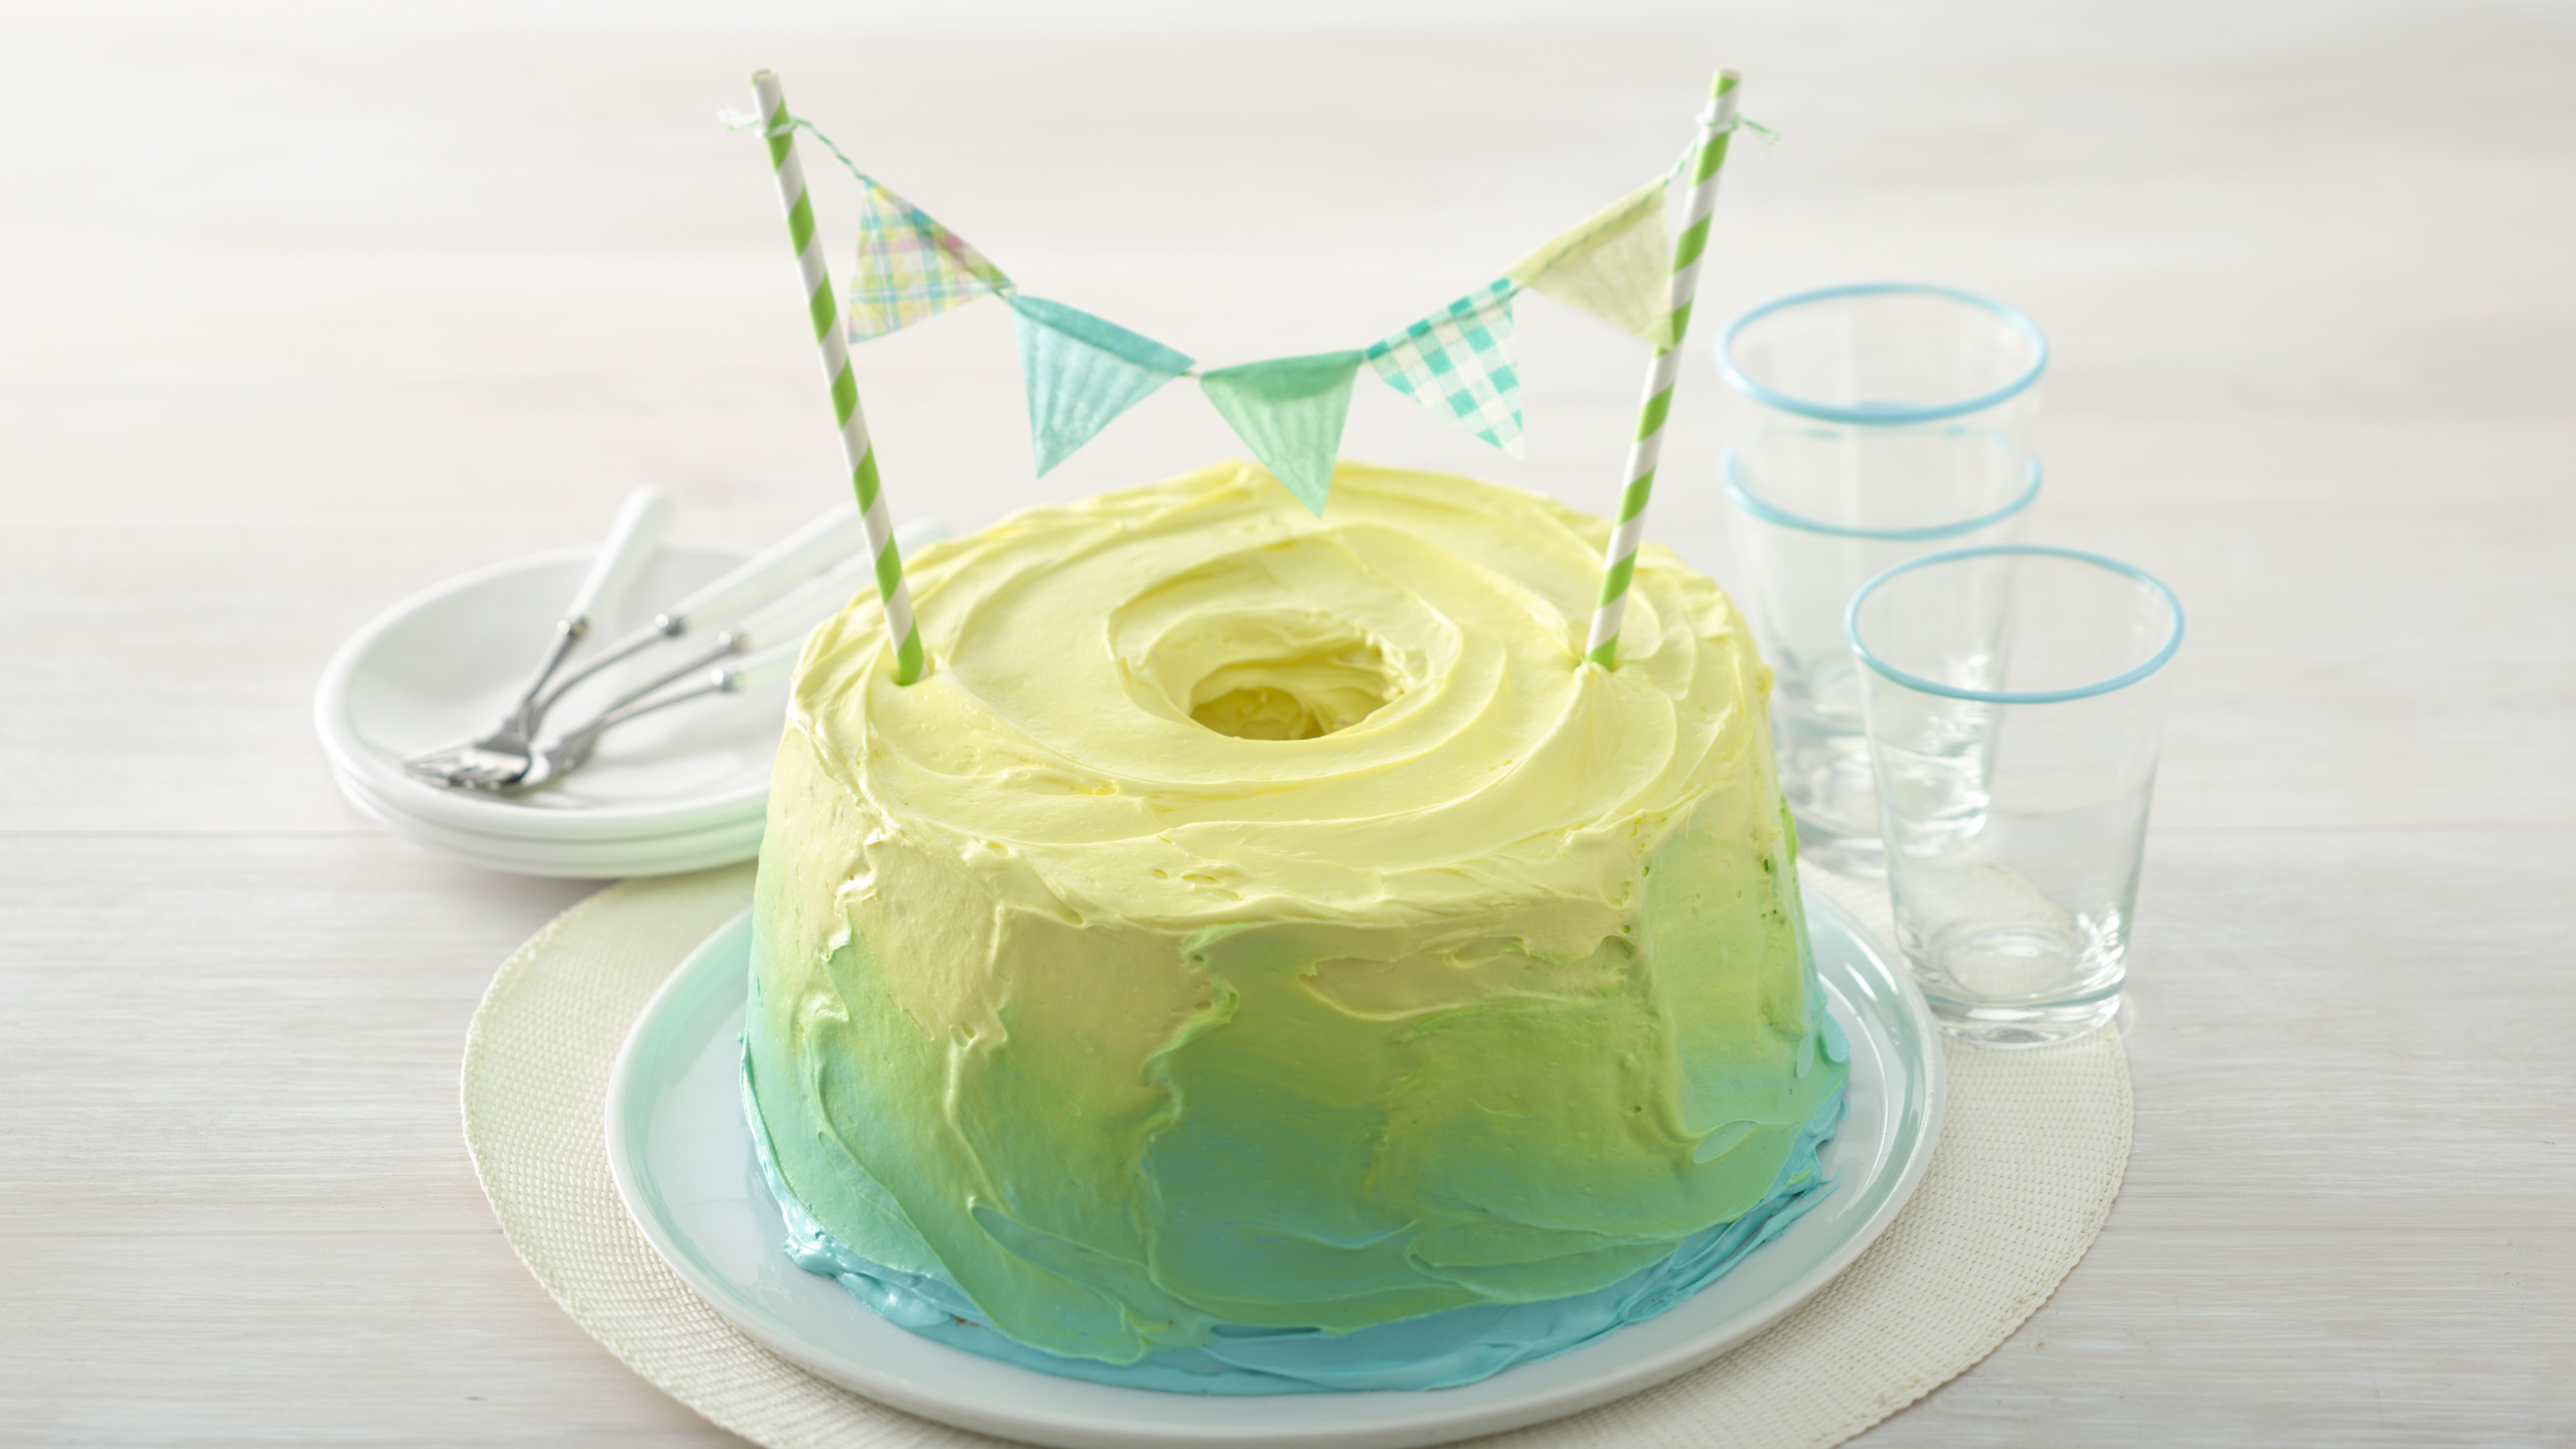 Ombre Rosette Cake: Easy Recipe with Step-by-Step Video Tutorial